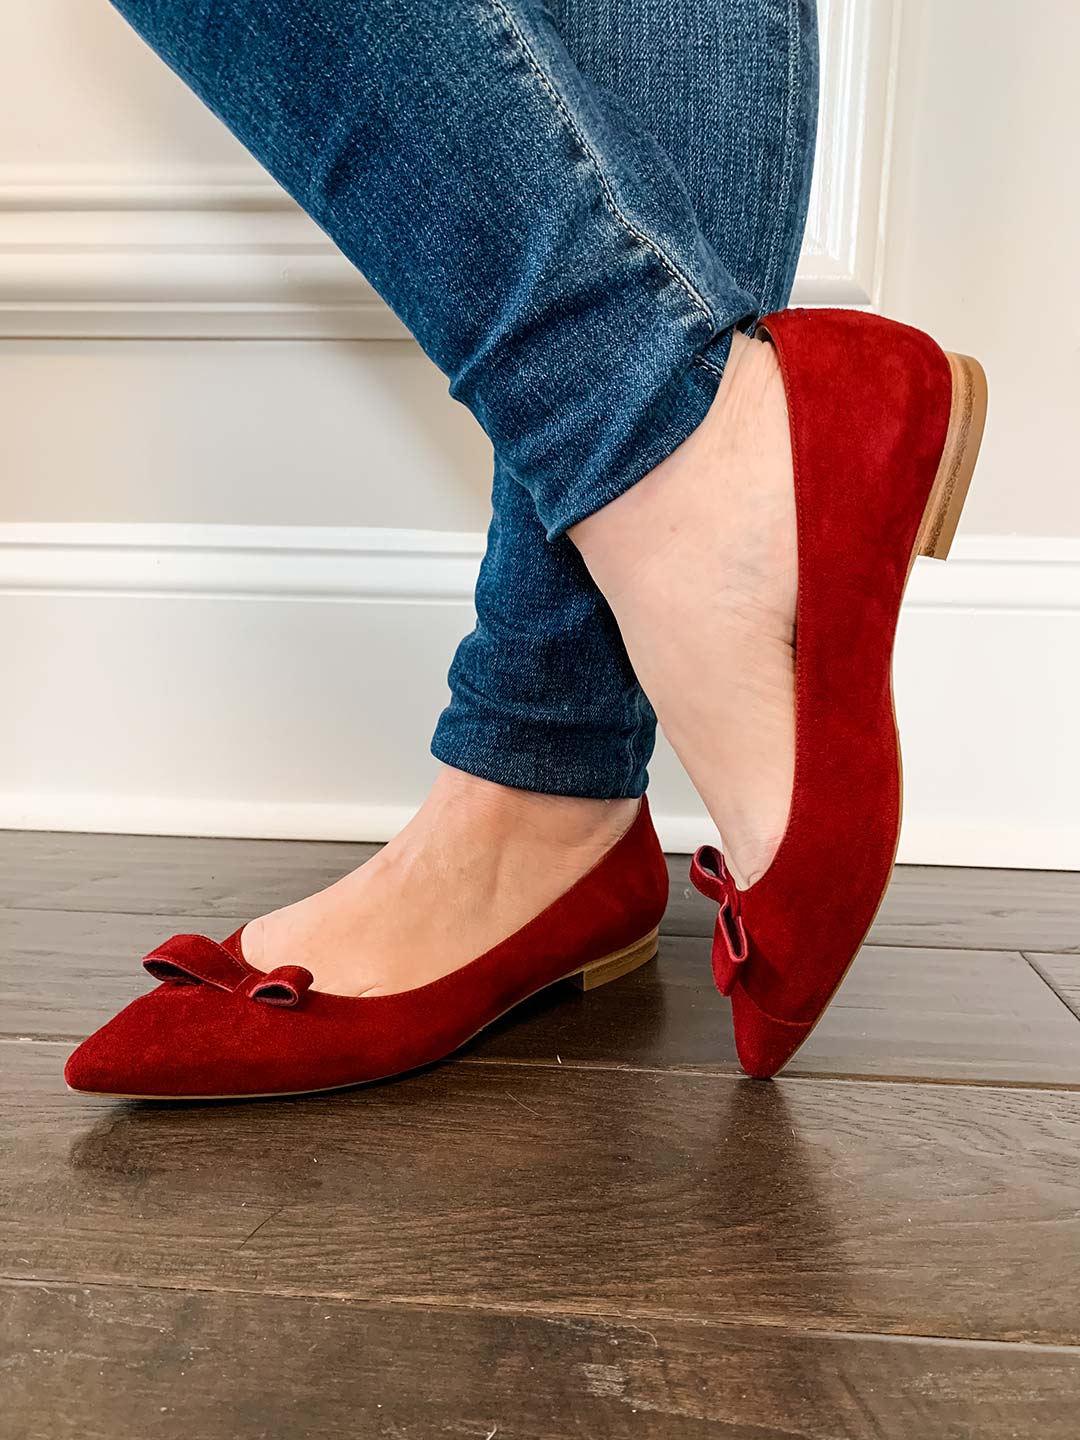 Sarah Flint Natalie ballet flats in red suede with jeans